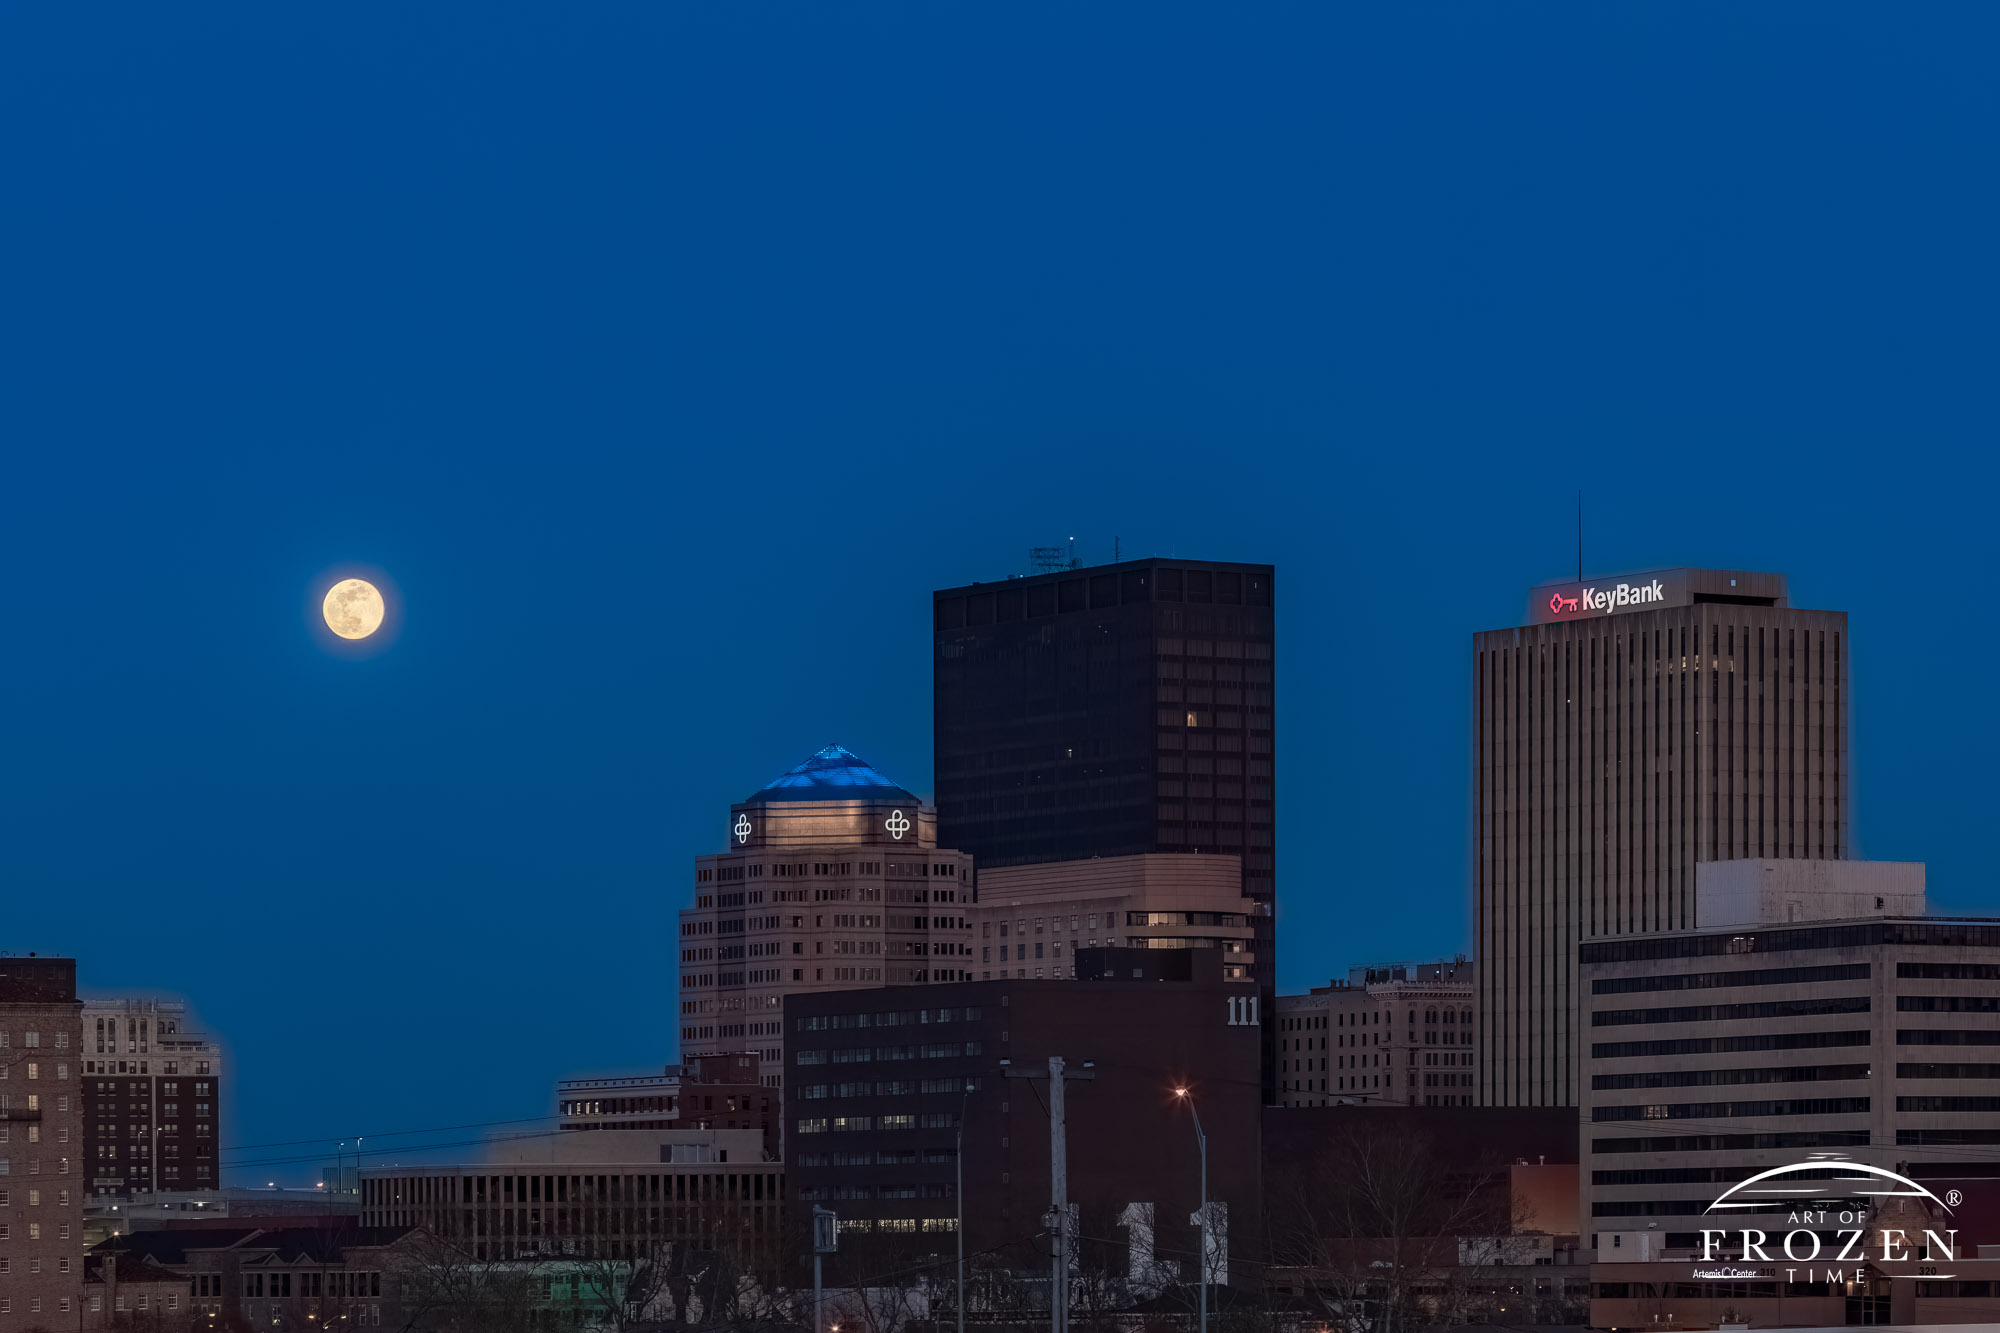 A twilight view of the Dayton Skyline with a full moon hanging above the the towers of Dayton, Ohio.